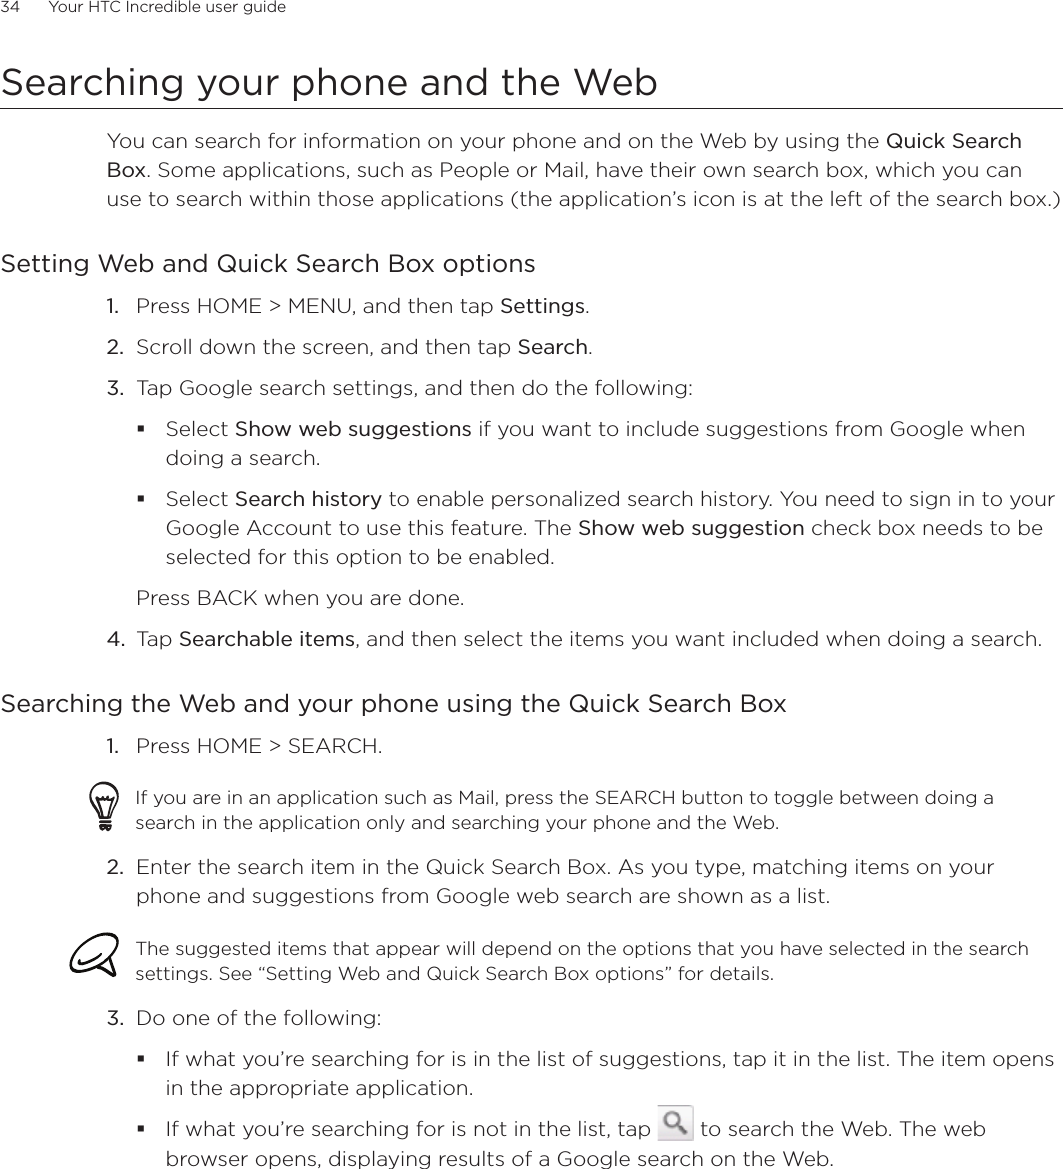 34      Your HTC Incredible user guide  Searching your phone and the WebYou can search for information on your phone and on the Web by using the Quick Search Box. Some applications, such as People or Mail, have their own search box, which you can use to search within those applications (the application’s icon is at the left of the search box.)Setting Web and Quick Search Box optionsPress HOME &gt; MENU, and then tap Settings. Scroll down the screen, and then tap Search. Tap Google search settings, and then do the following:Select Show web suggestions if you want to include suggestions from Google when doing a search.Select Search history to enable personalized search history. You need to sign in to your Google Account to use this feature. The Show web suggestion check box needs to be selected for this option to be enabled. Press BACK when you are done. Tap Searchable items, and then select the items you want included when doing a search. Searching the Web and your phone using the Quick Search BoxPress HOME &gt; SEARCH. If you are in an application such as Mail, press the SEARCH button to toggle between doing a search in the application only and searching your phone and the Web. Enter the search item in the Quick Search Box. As you type, matching items on your phone and suggestions from Google web search are shown as a list.The suggested items that appear will depend on the options that you have selected in the search settings. See “Setting Web and Quick Search Box options” for details. Do one of the following:If what you’re searching for is in the list of suggestions, tap it in the list. The item opens in the appropriate application.If what you’re searching for is not in the list, tap   to search the Web. The web browser opens, displaying results of a Google search on the Web.1.2.3.4.1.2.3.